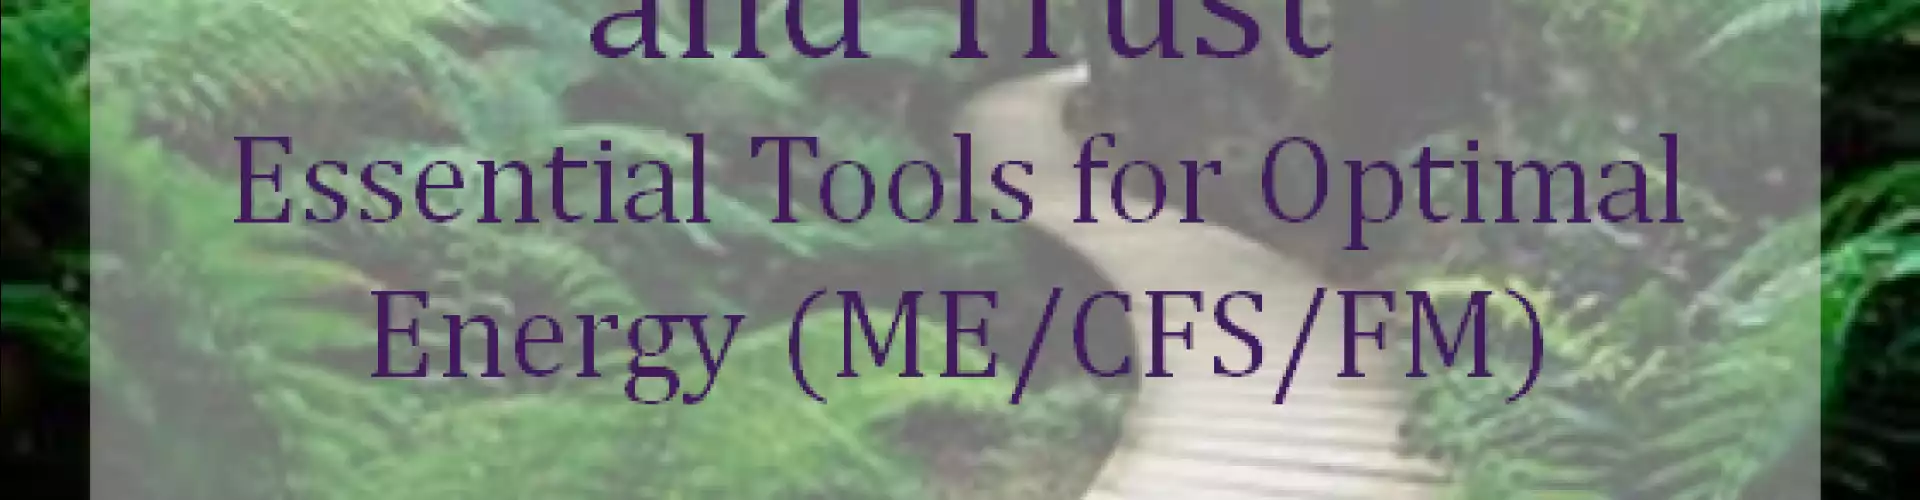 Acceptance, Hope and Trust: Essential tools for optimal energy (ME/CFS/FM)